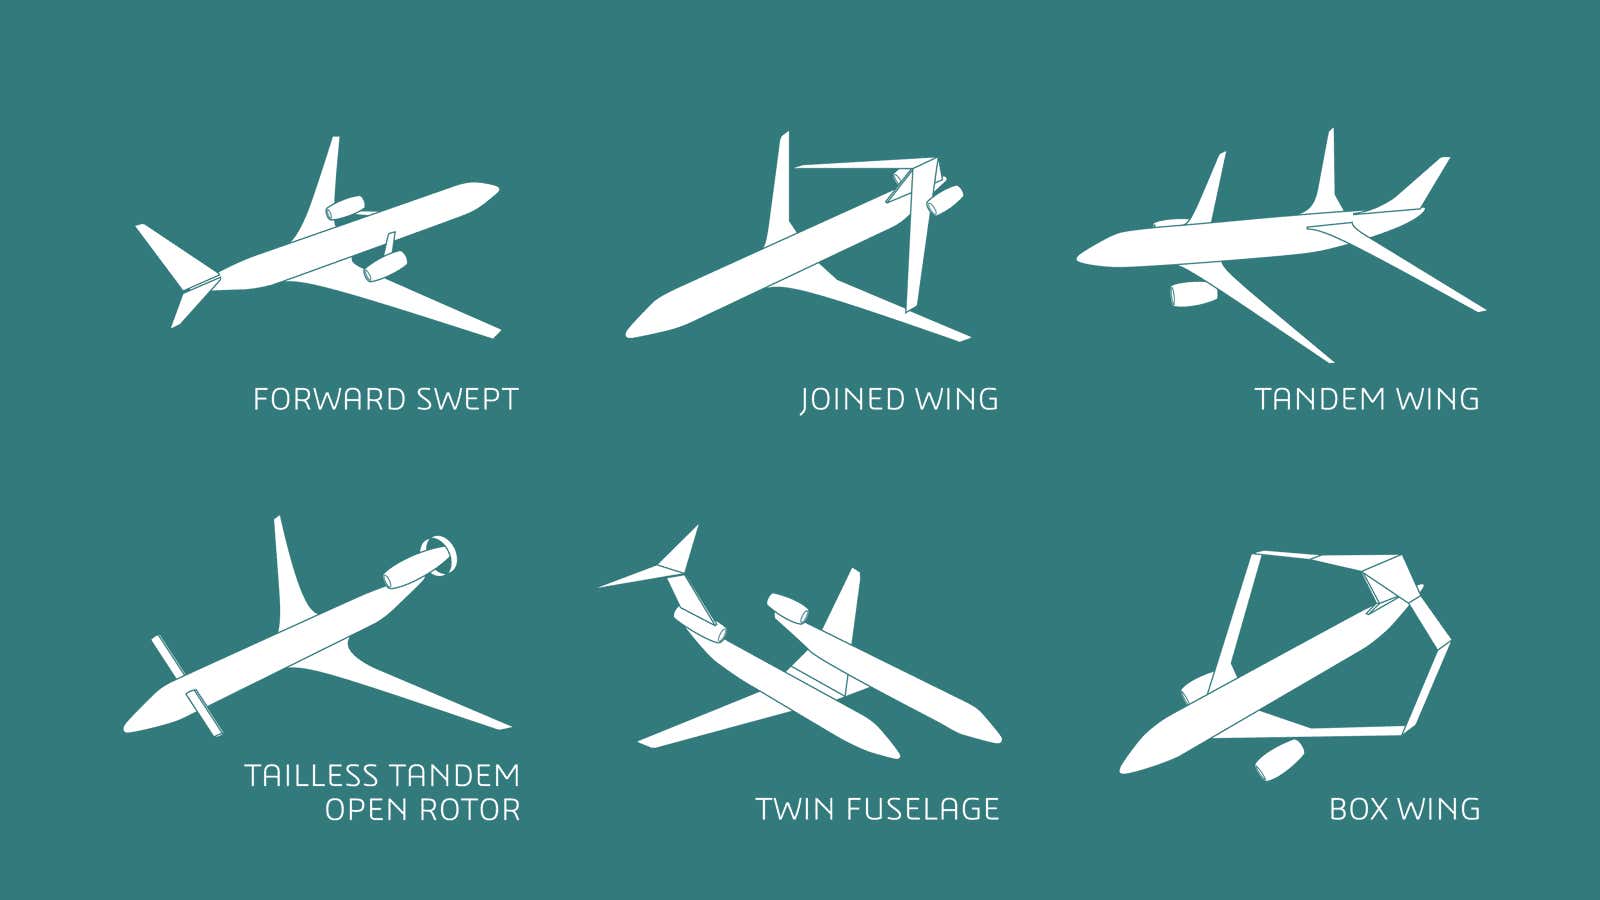 Changes to airplanes’ wings and tails will have immense impact on passenger experience.